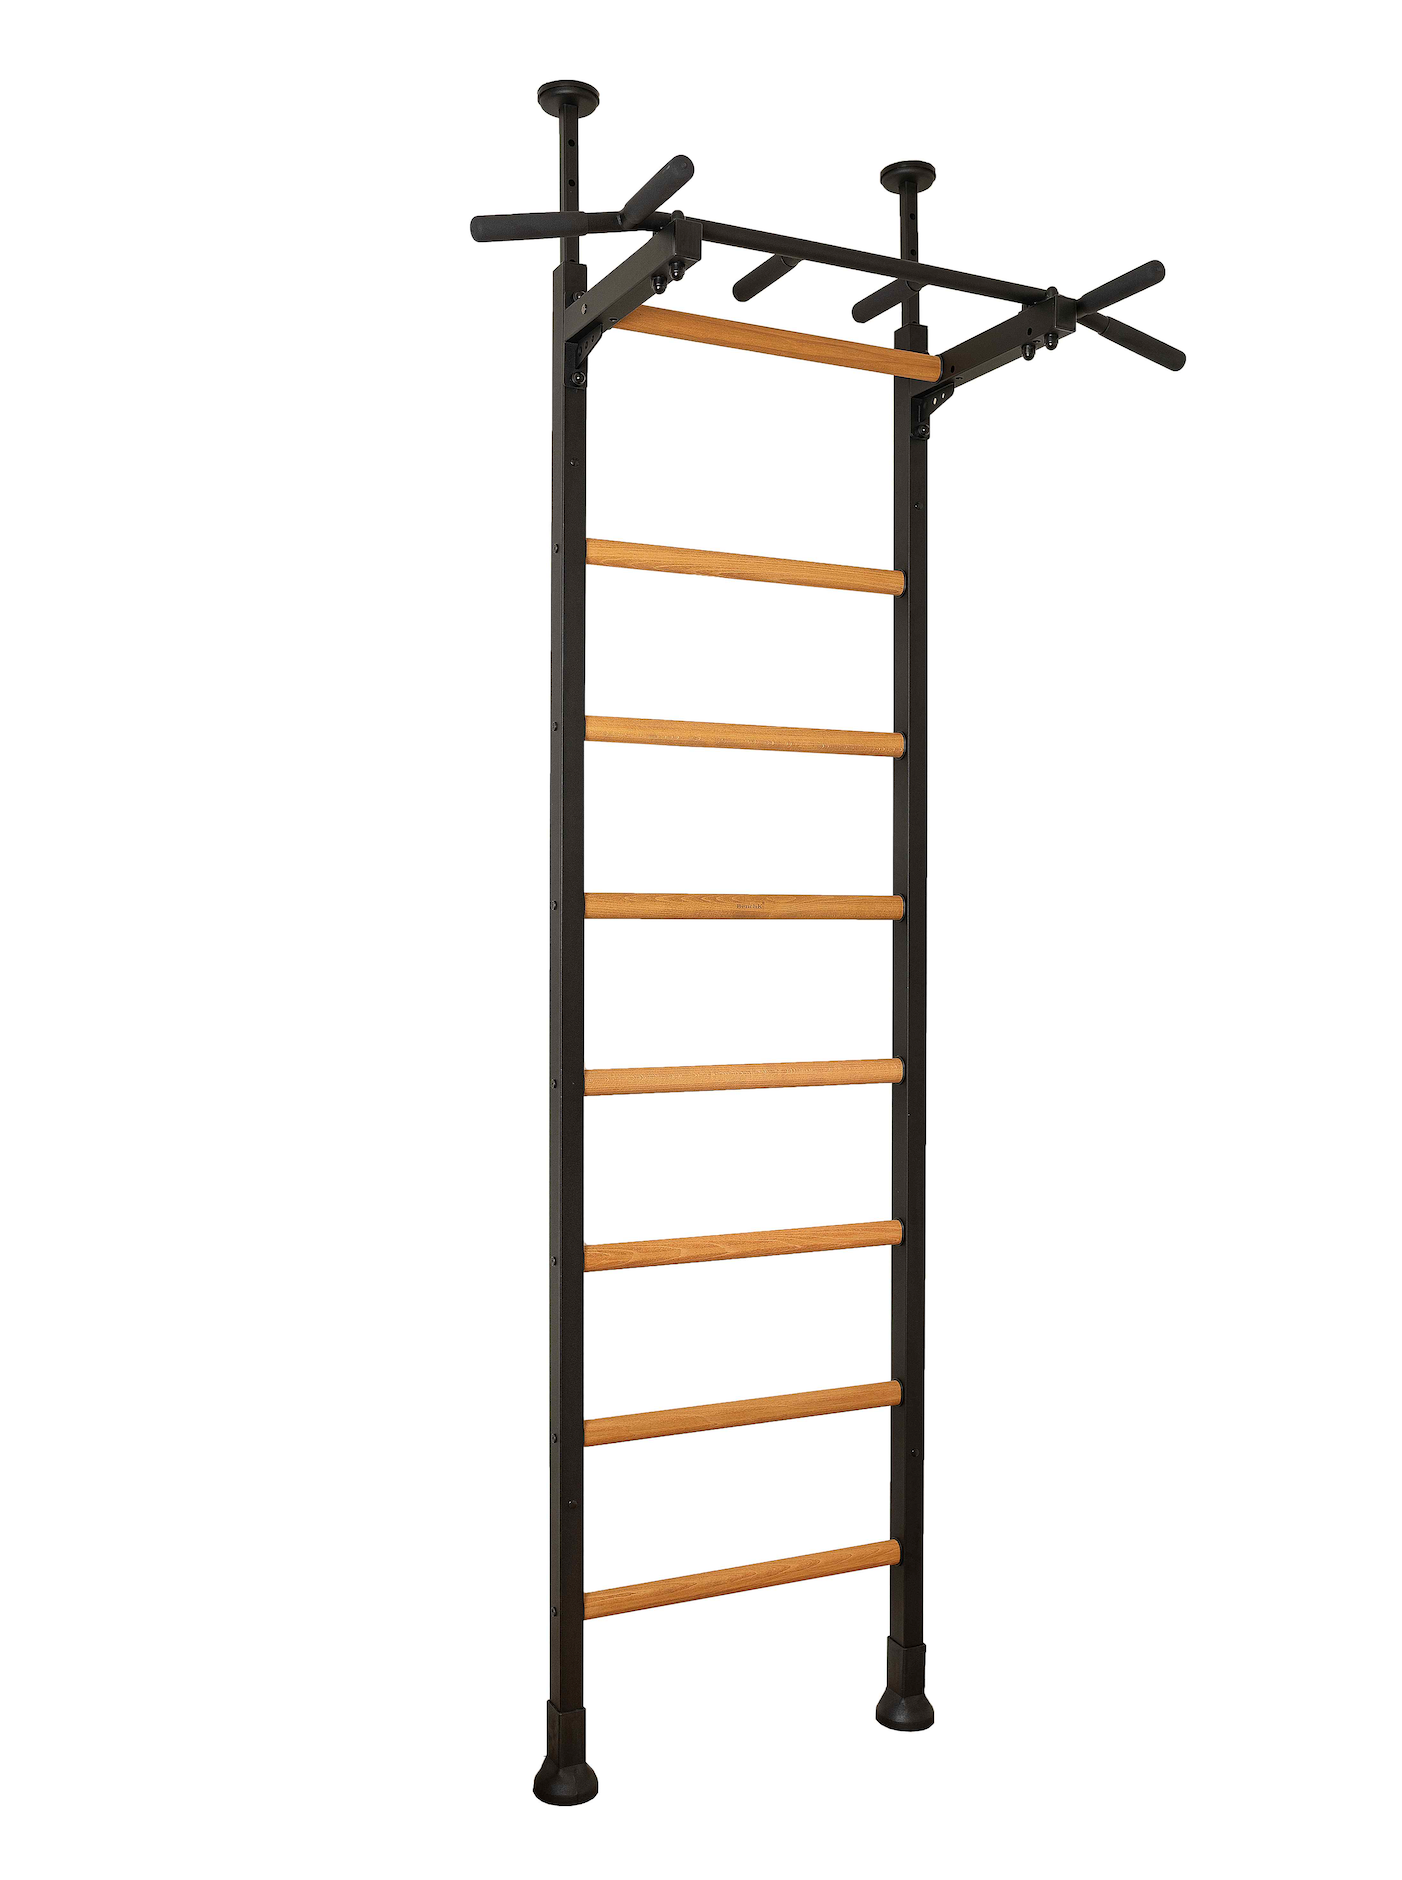 BenchK 521 Wall Bars with Fixed Pull Up Bar Swedish Ladder Home Gym Equipment